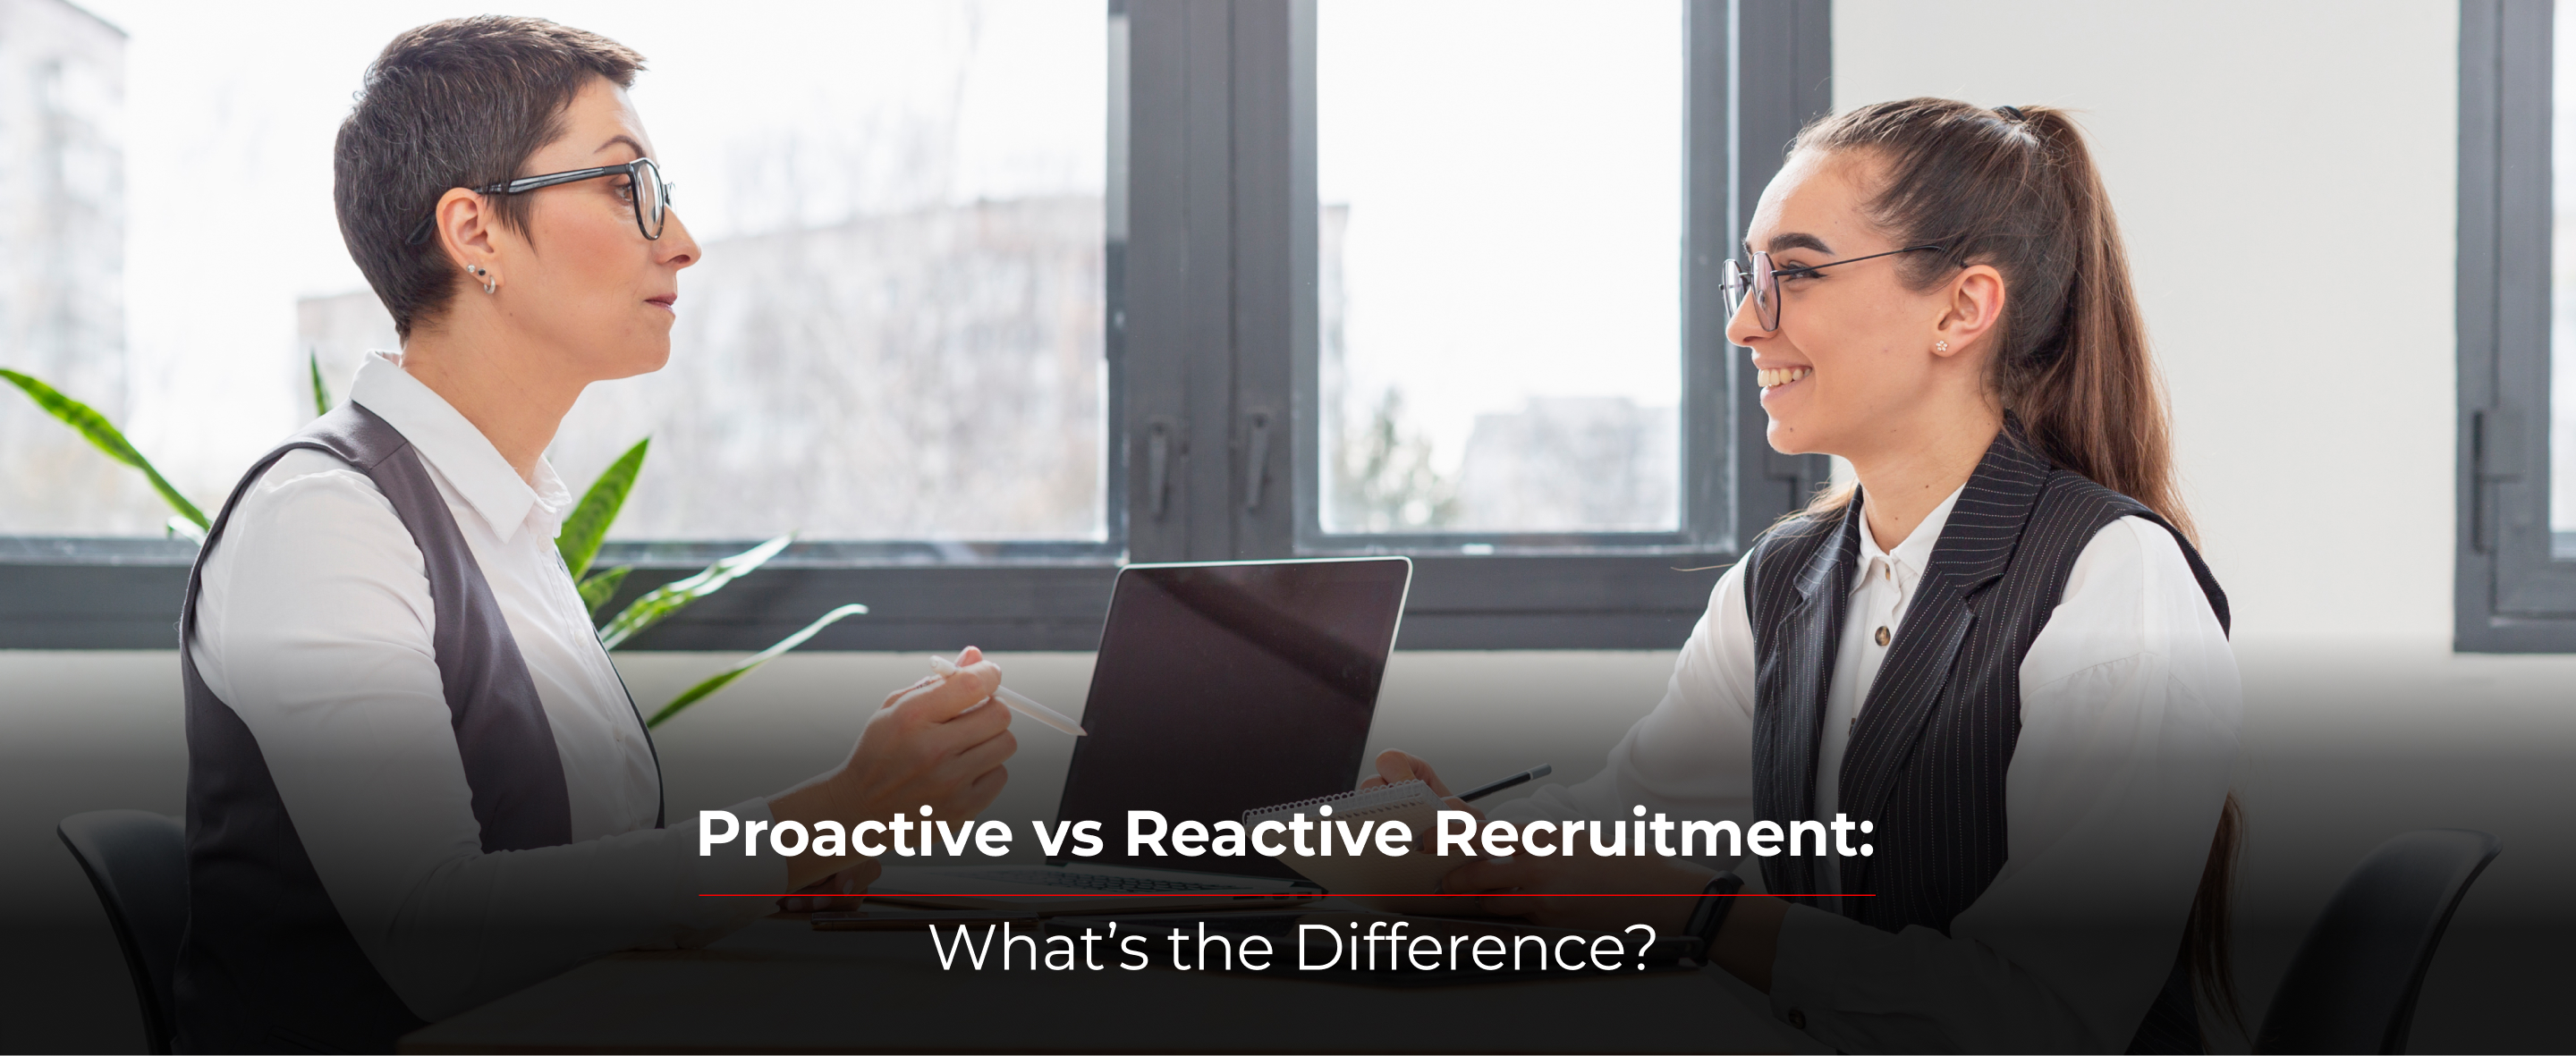 Proactive vs Reactive Recruitment: What’s the Difference?